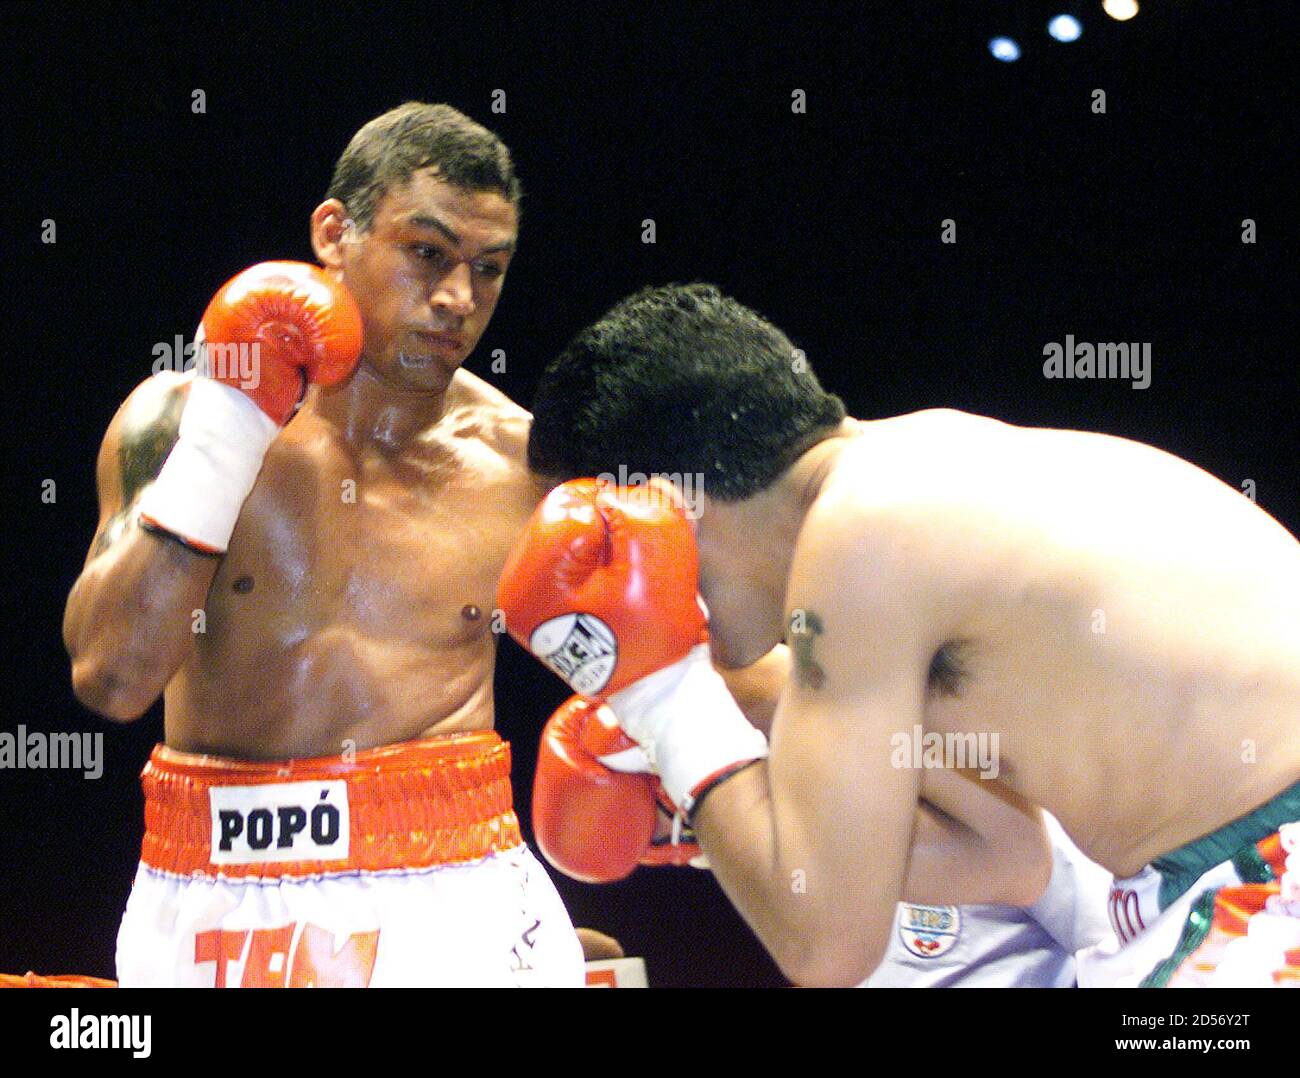 Champion Acelino Popo de Freitas (L) connects with a left punch to Mexican  challenger Javier Jauregui during the (WBO) World Organization of Box super  feather weight title bout in Sao Paulo late